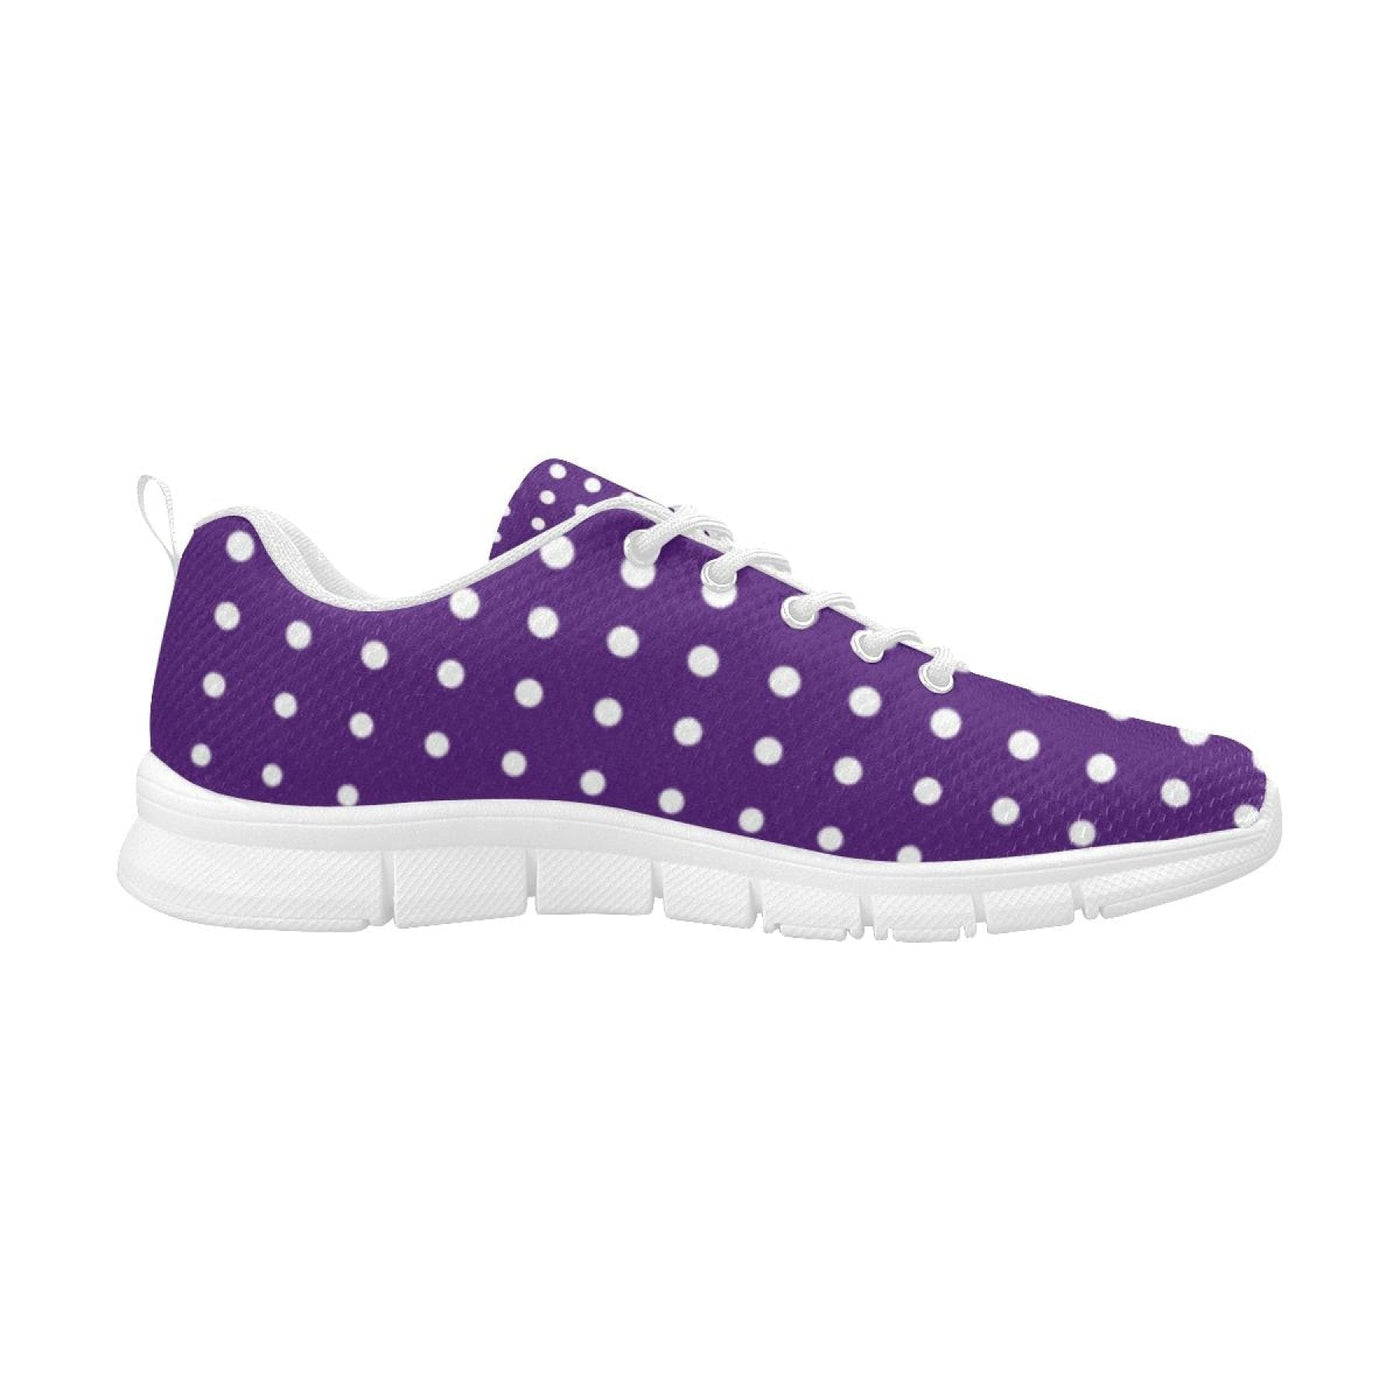 Sneakers For Women Purple And White Polka Dot - Running Shoes - Womens |